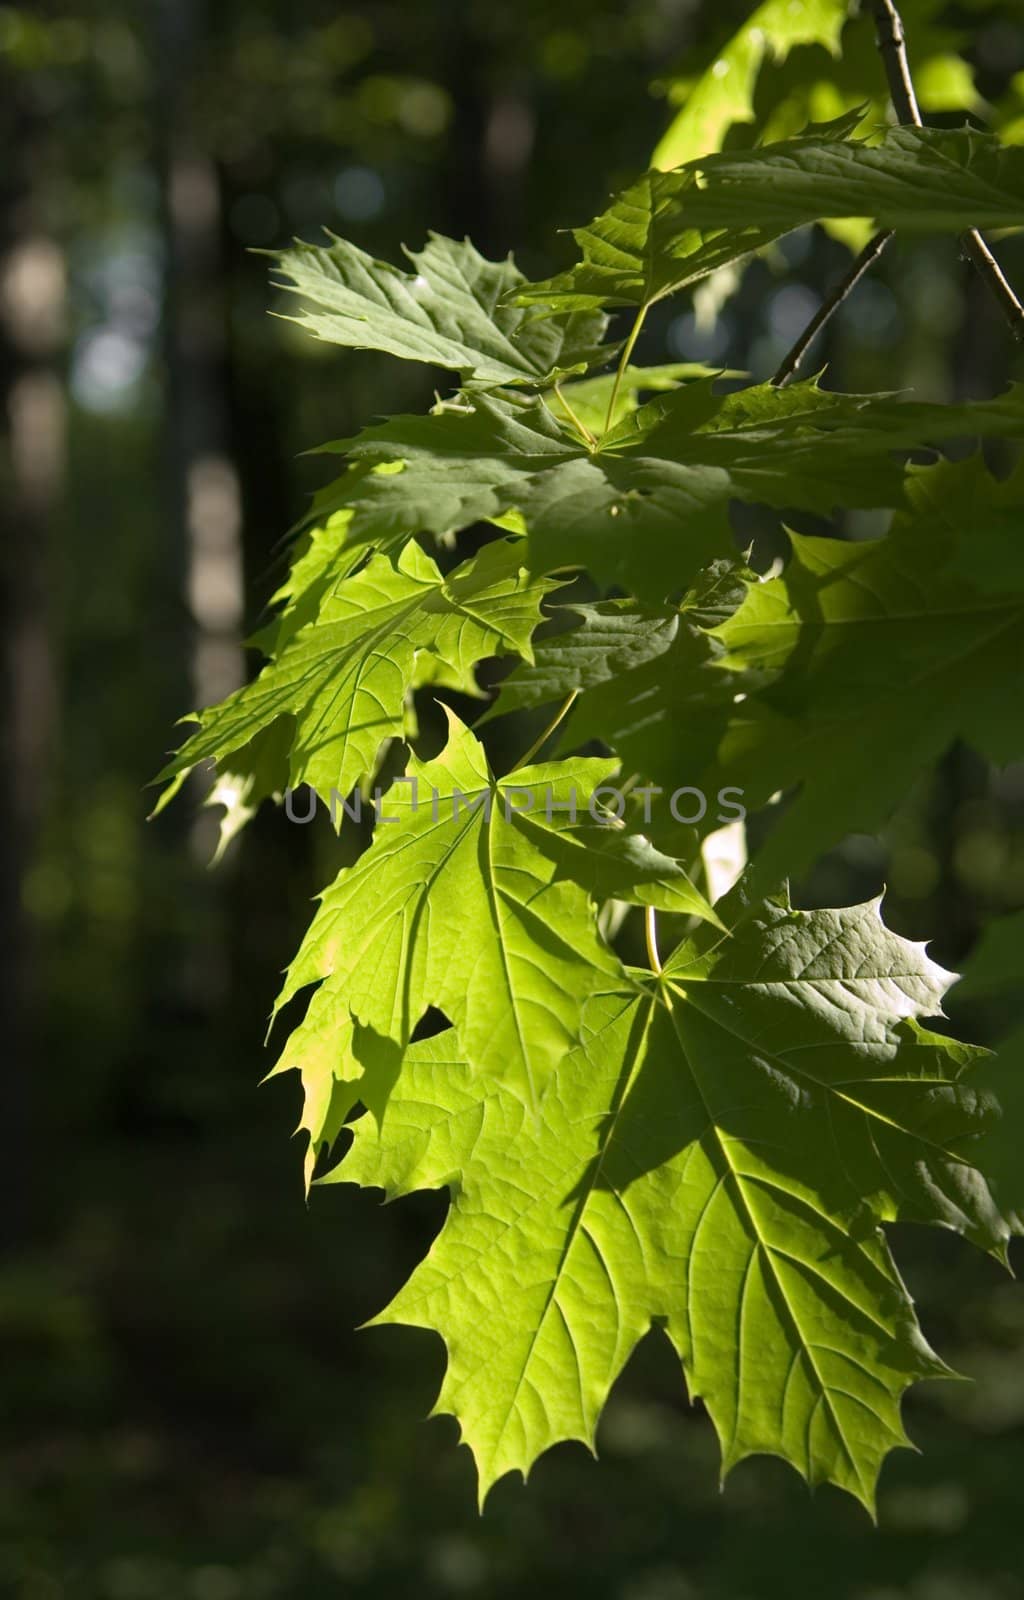 Leaves of maple in a garden